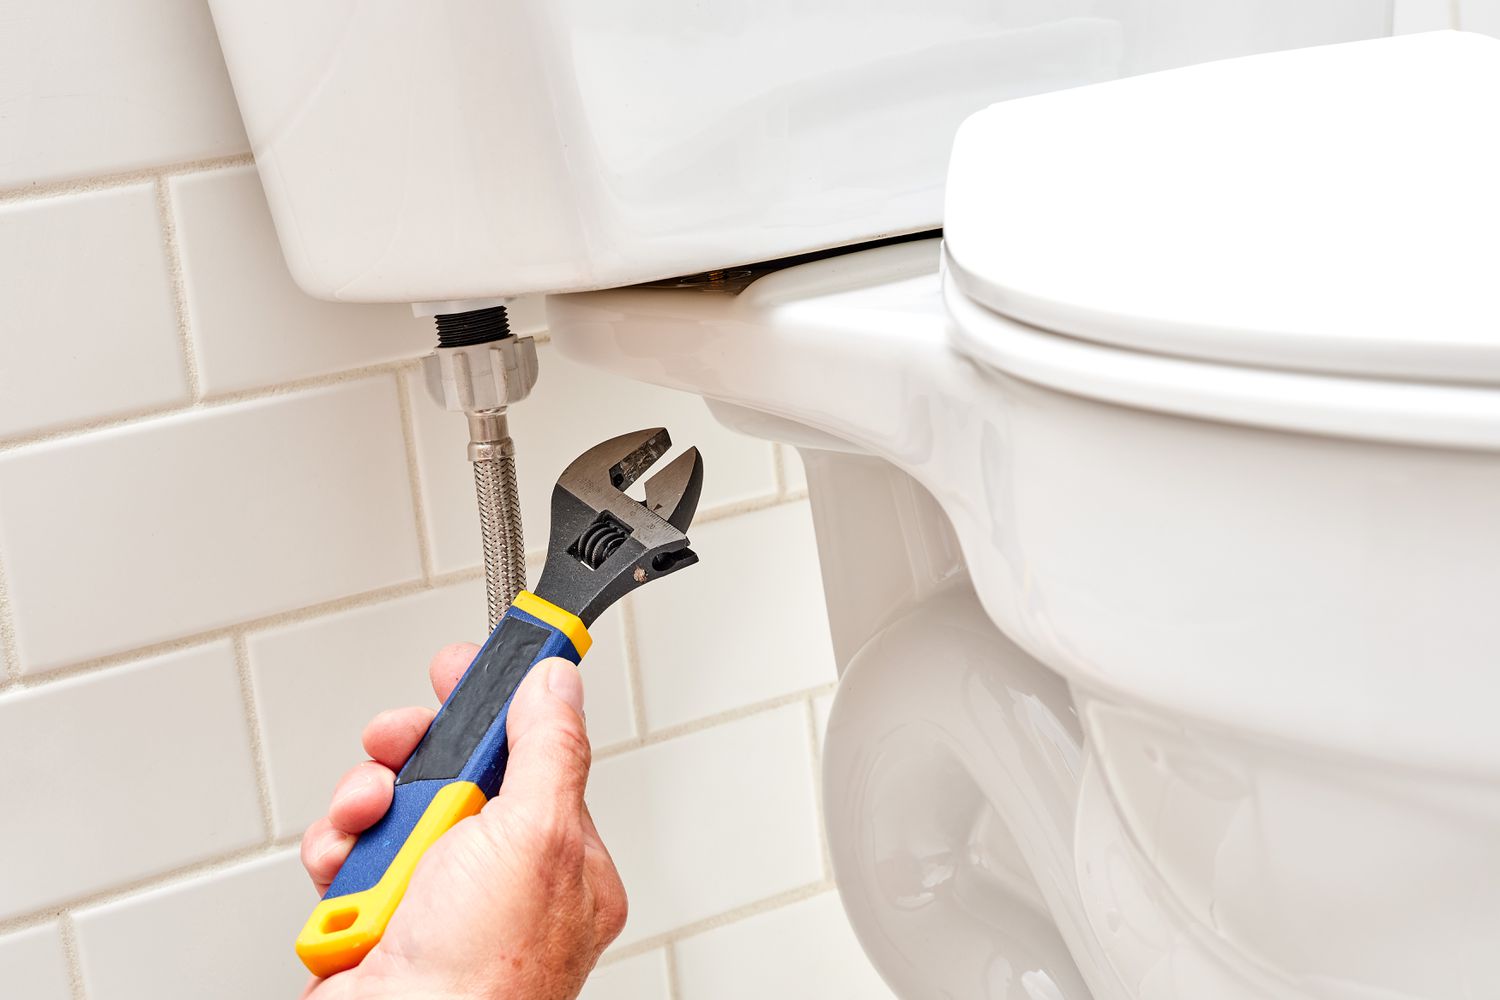 How To Fix A Leaking Toilet Bowl